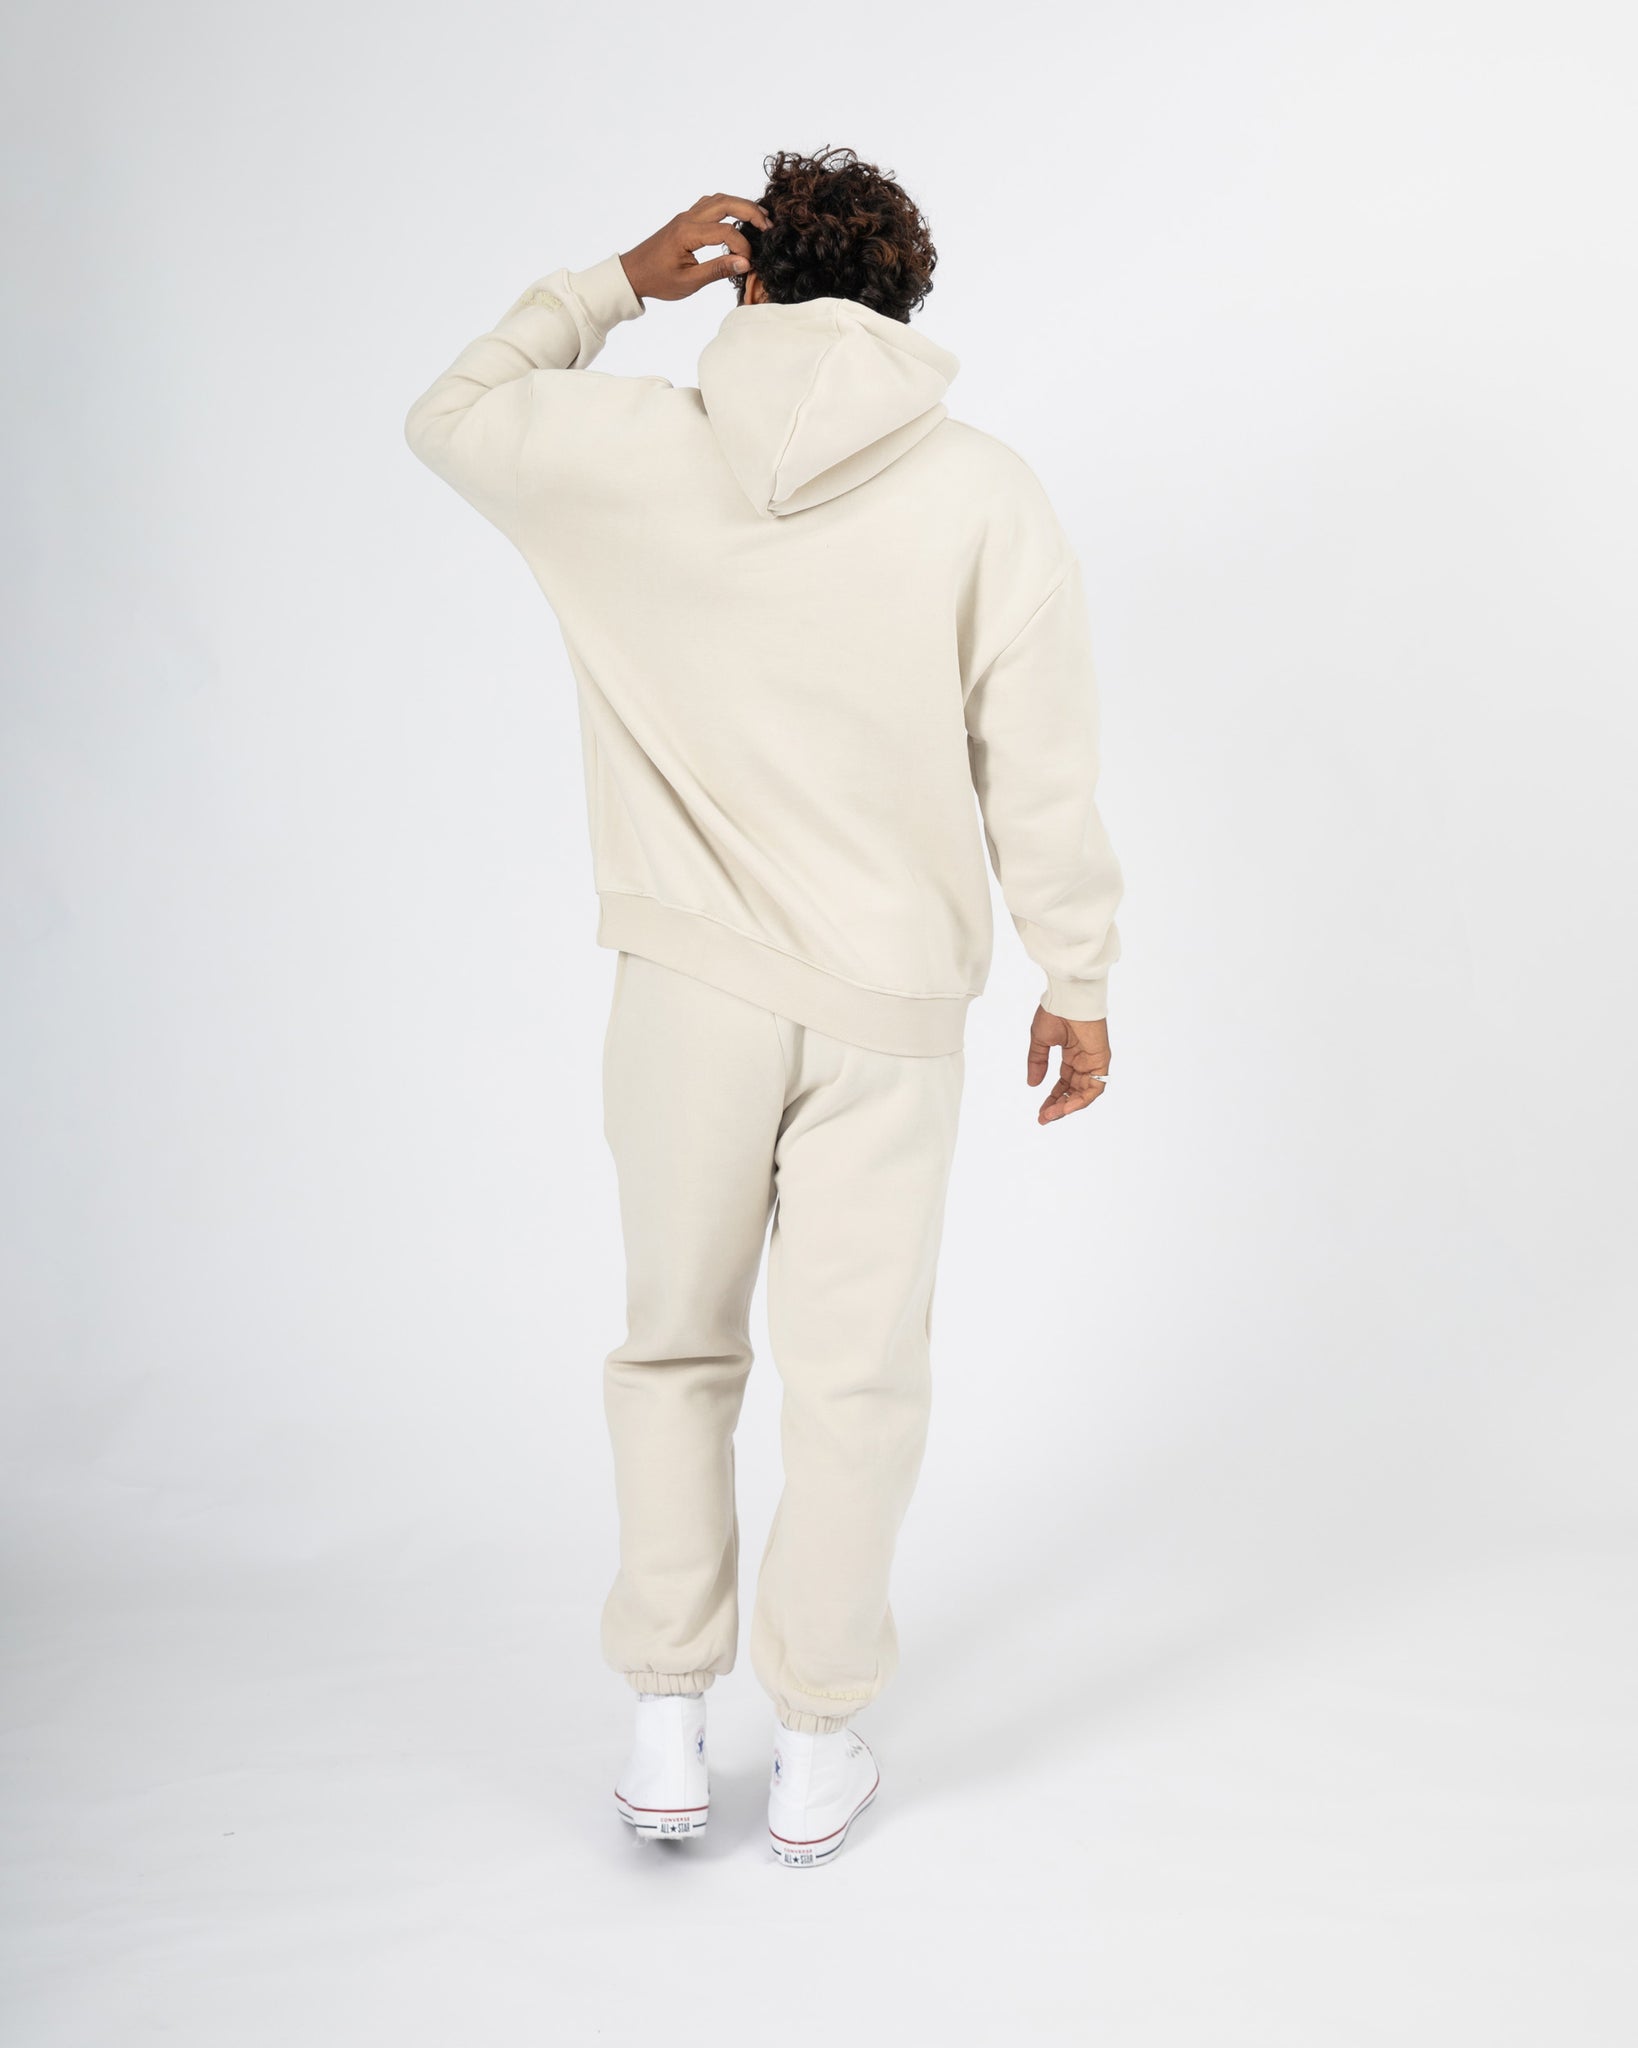 Picked For You Trackpants - Pebble